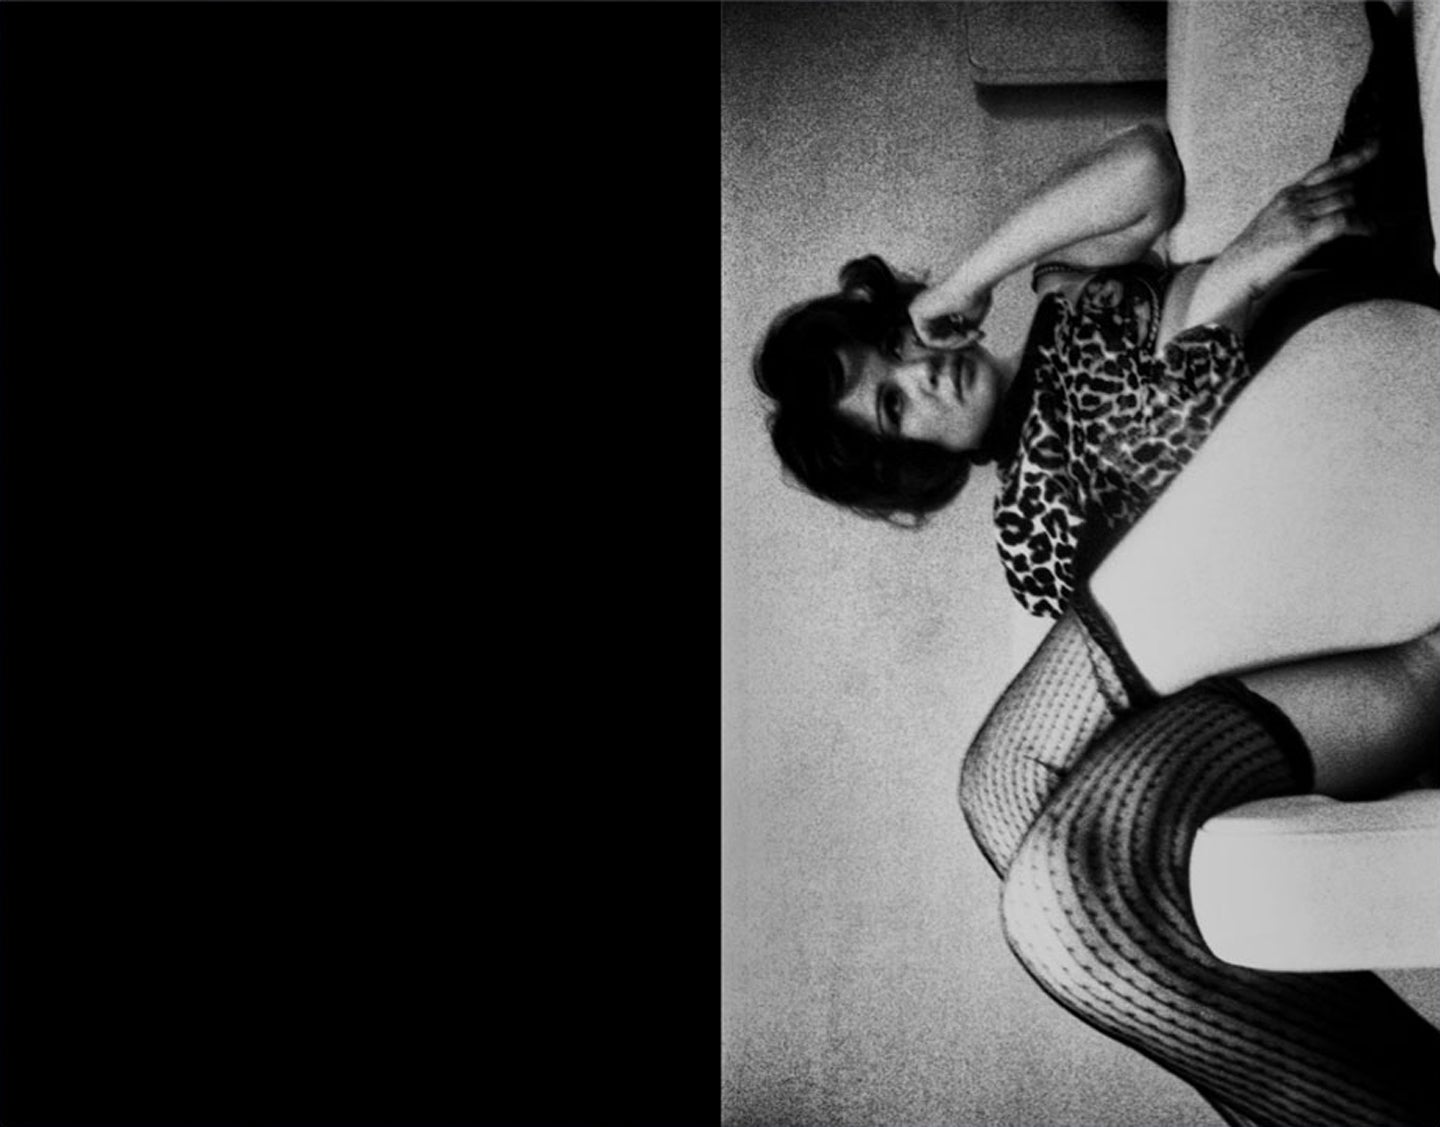 NZ Library #1: Daido Moriyama: Mantis, Special Limited Edition (with Gelatin Silver Print) (NZ Library - Set One, Volume Five)